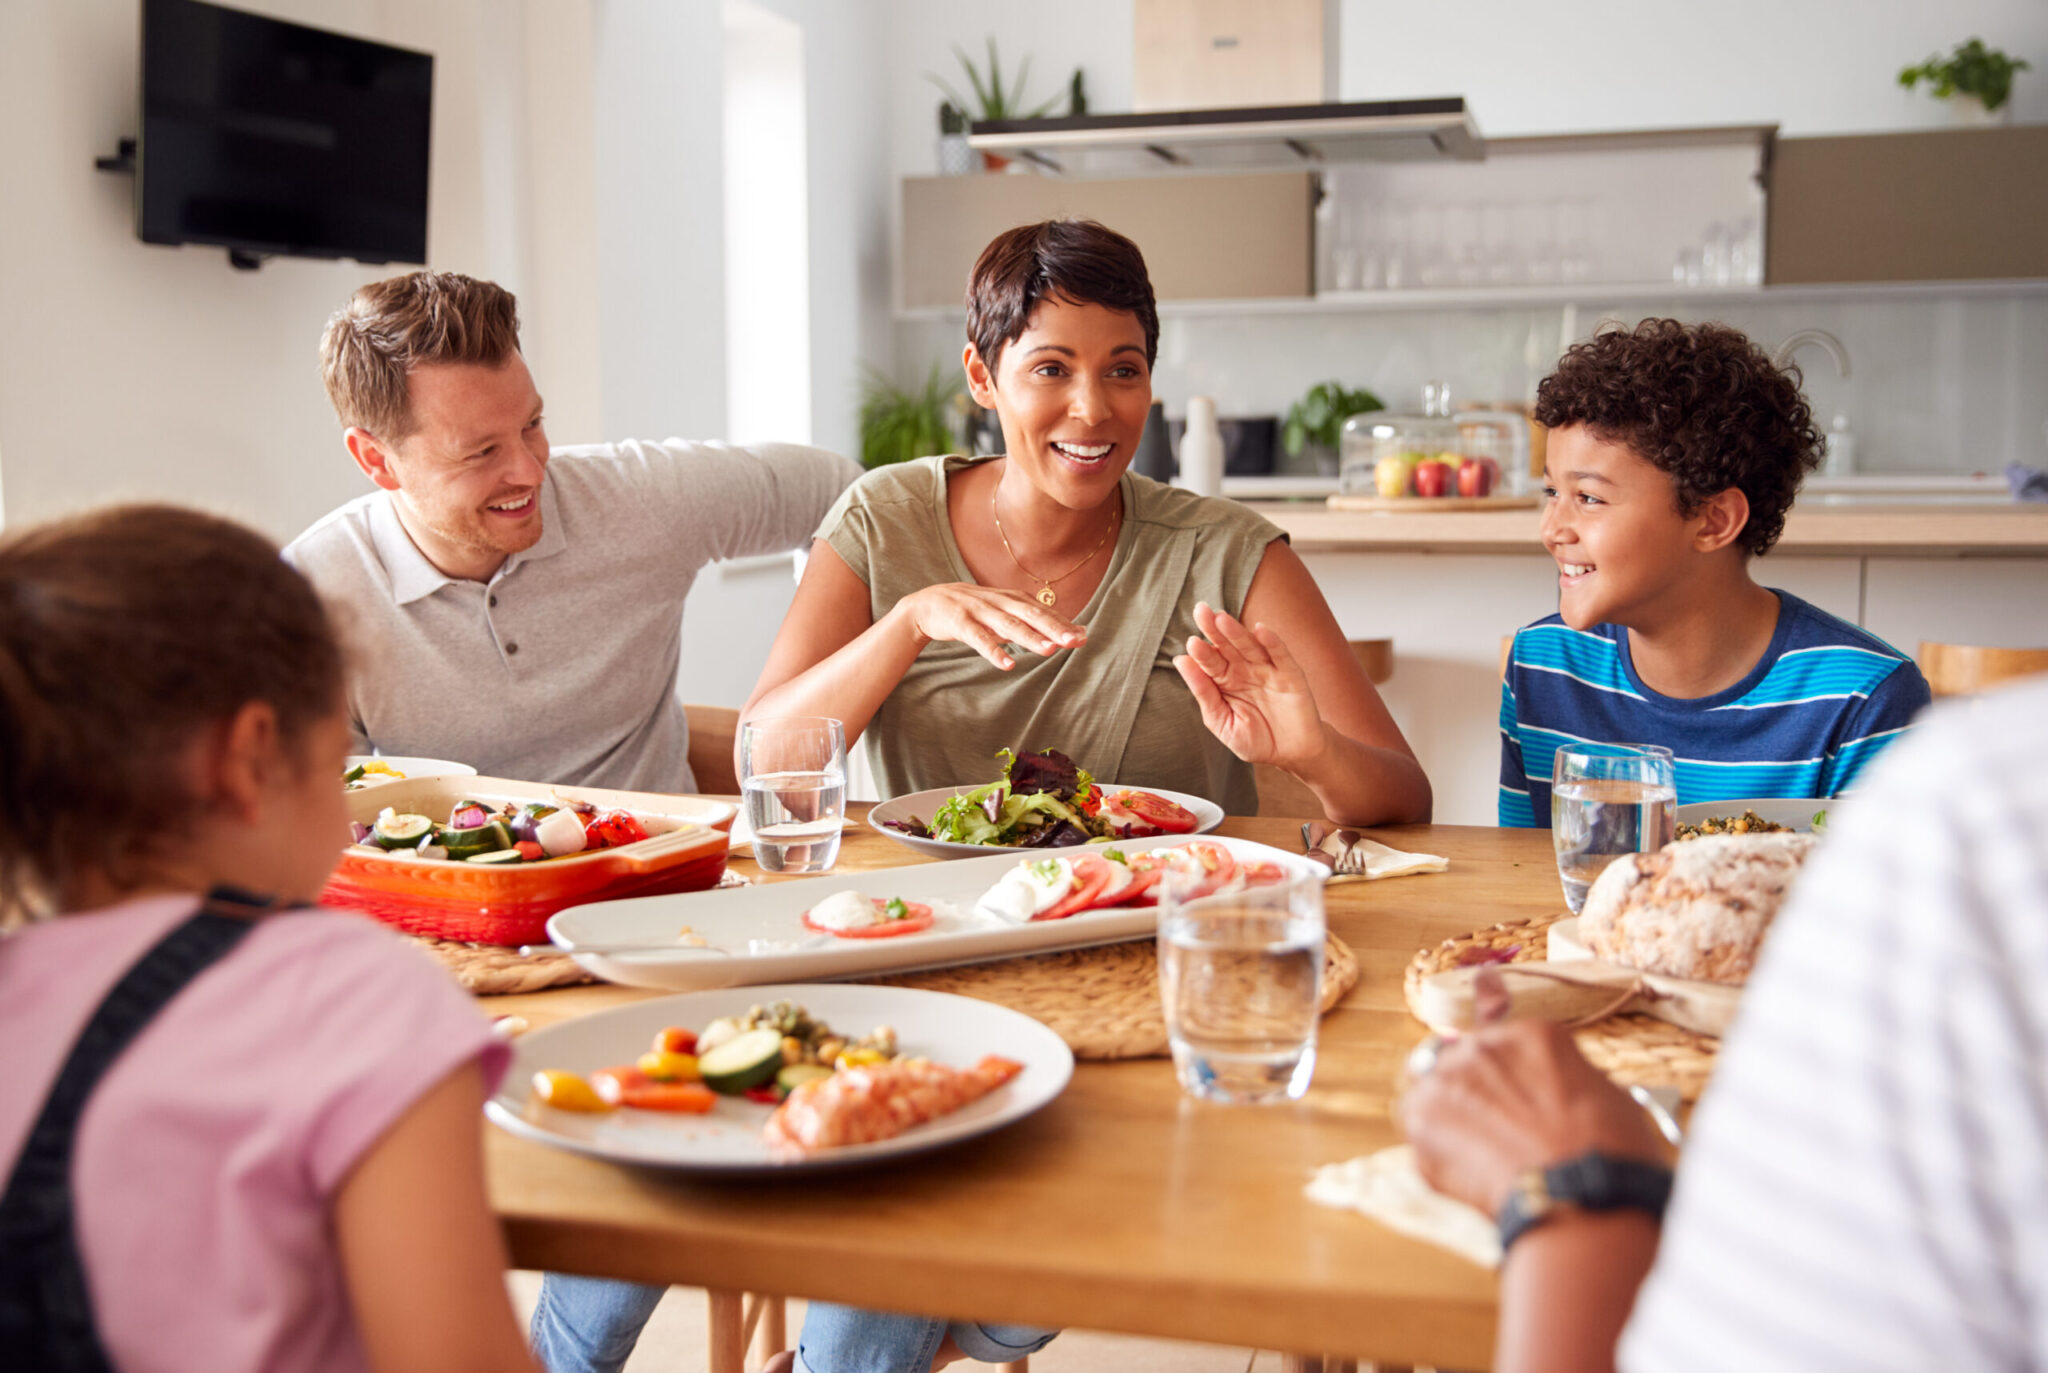 eating together with family essay